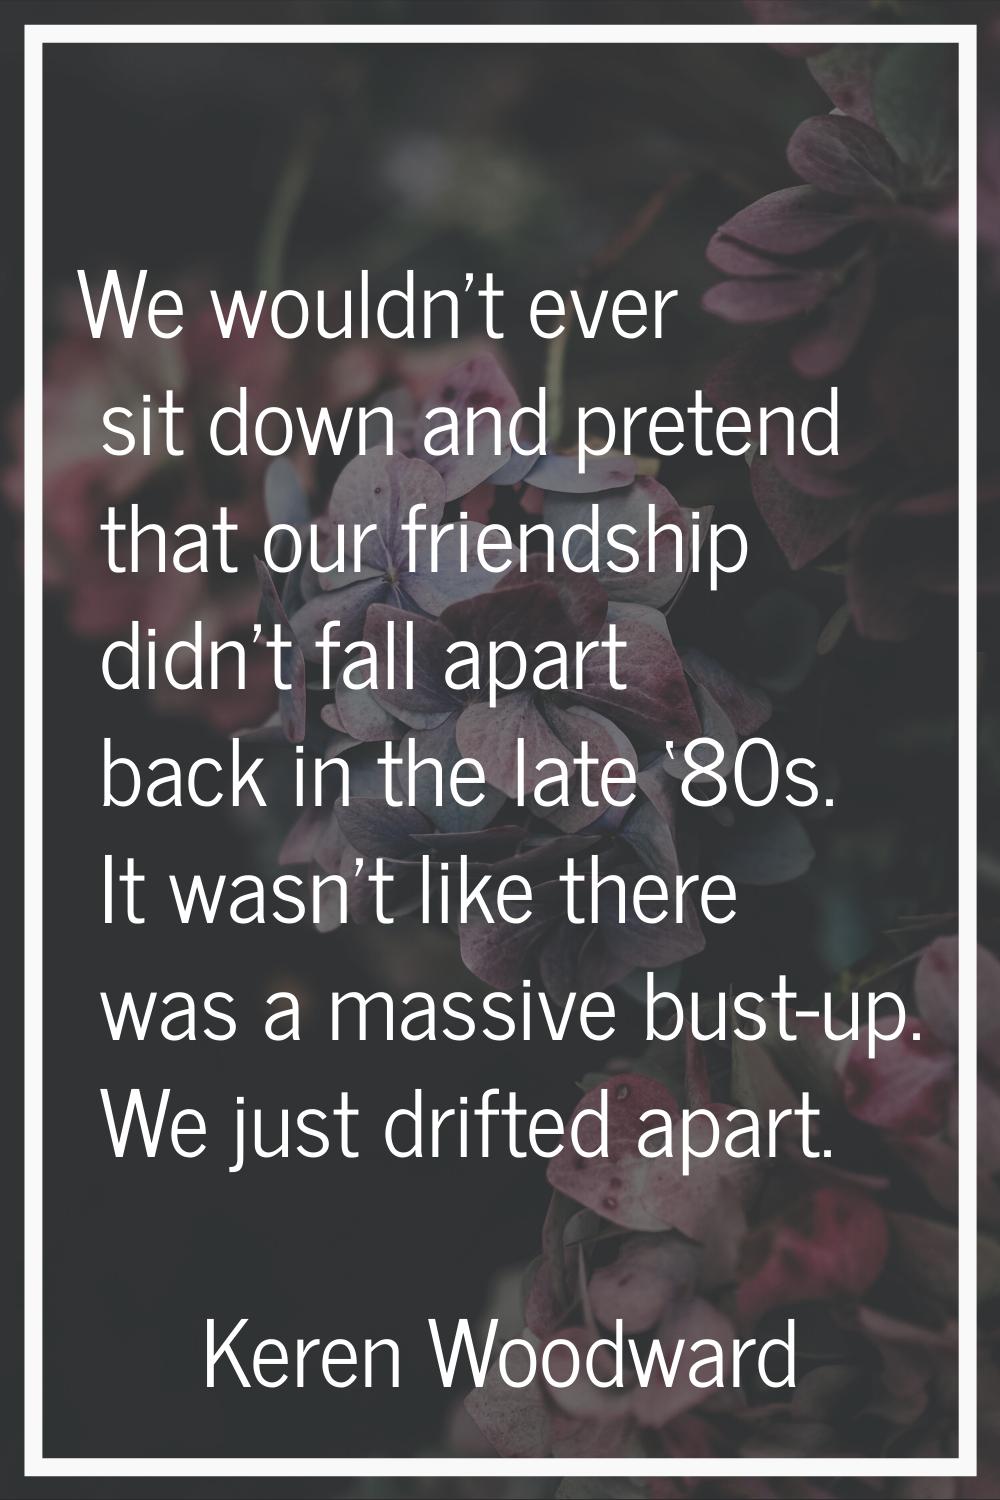 We wouldn't ever sit down and pretend that our friendship didn't fall apart back in the late ‘80s. 